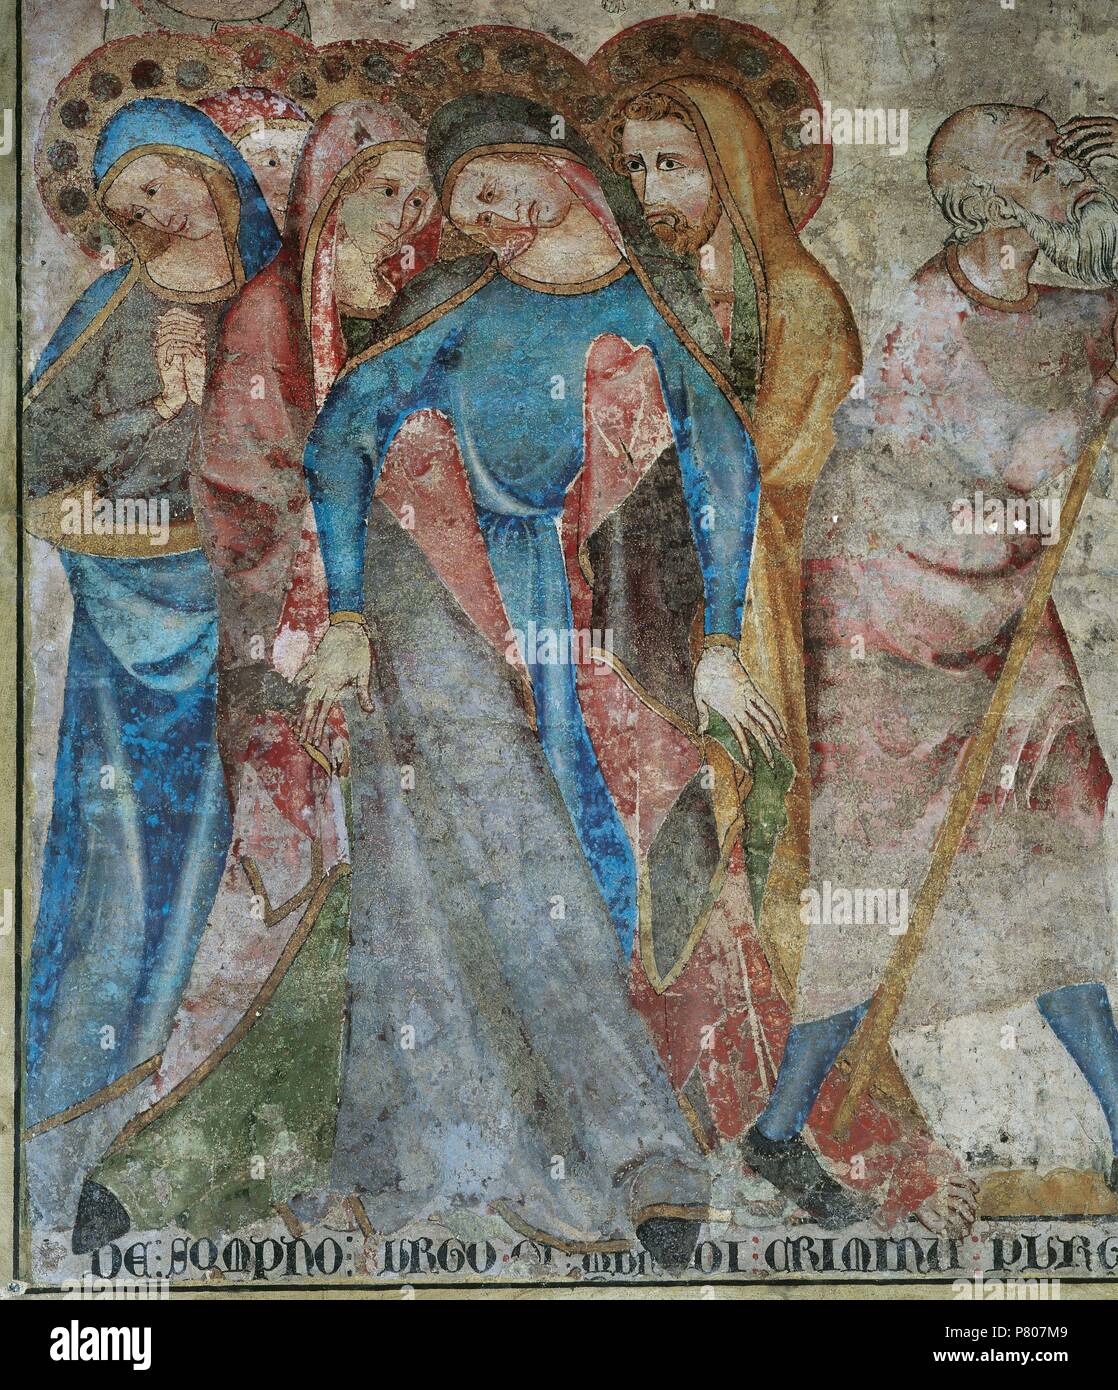 Juan Oliver. Painter. Active in Navarra, Spain, 14th century. Crucifixion, 1330. Grieving Virgin Mary. Fresco. Refectory of Pamplona Cathedral. Gothic. Museum of Navarre, Pamplona, Spain. Stock Photo